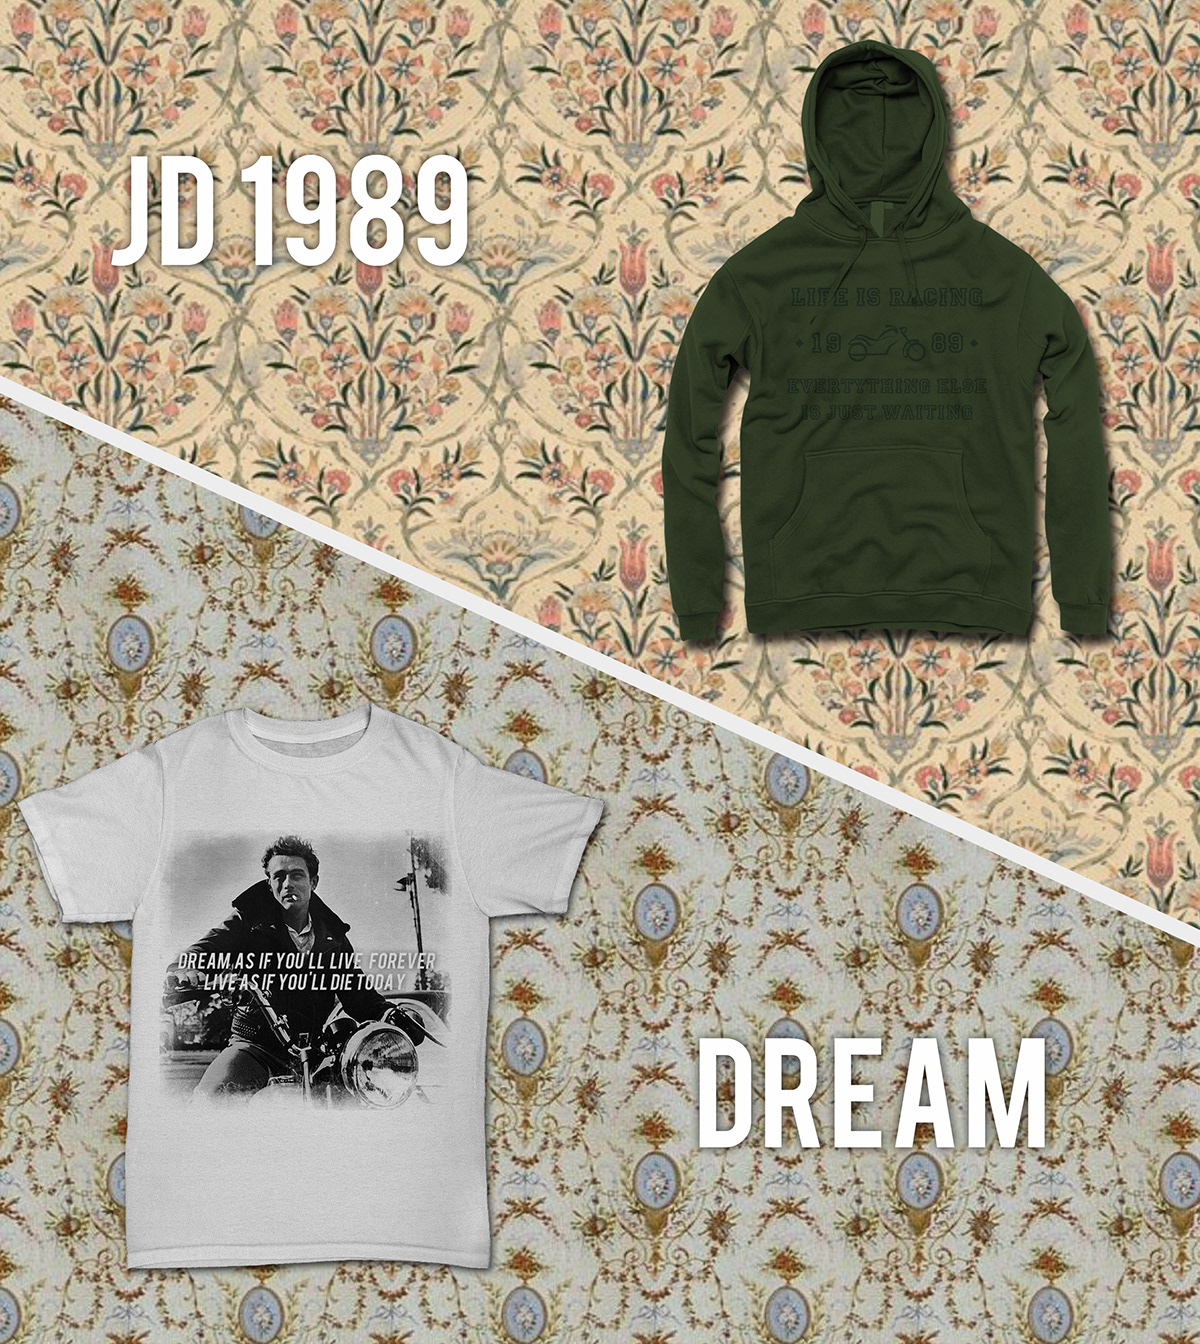 graphic One Day t-shirt placement graphic Urban streetwear inspiration james dean Drake salvador dali